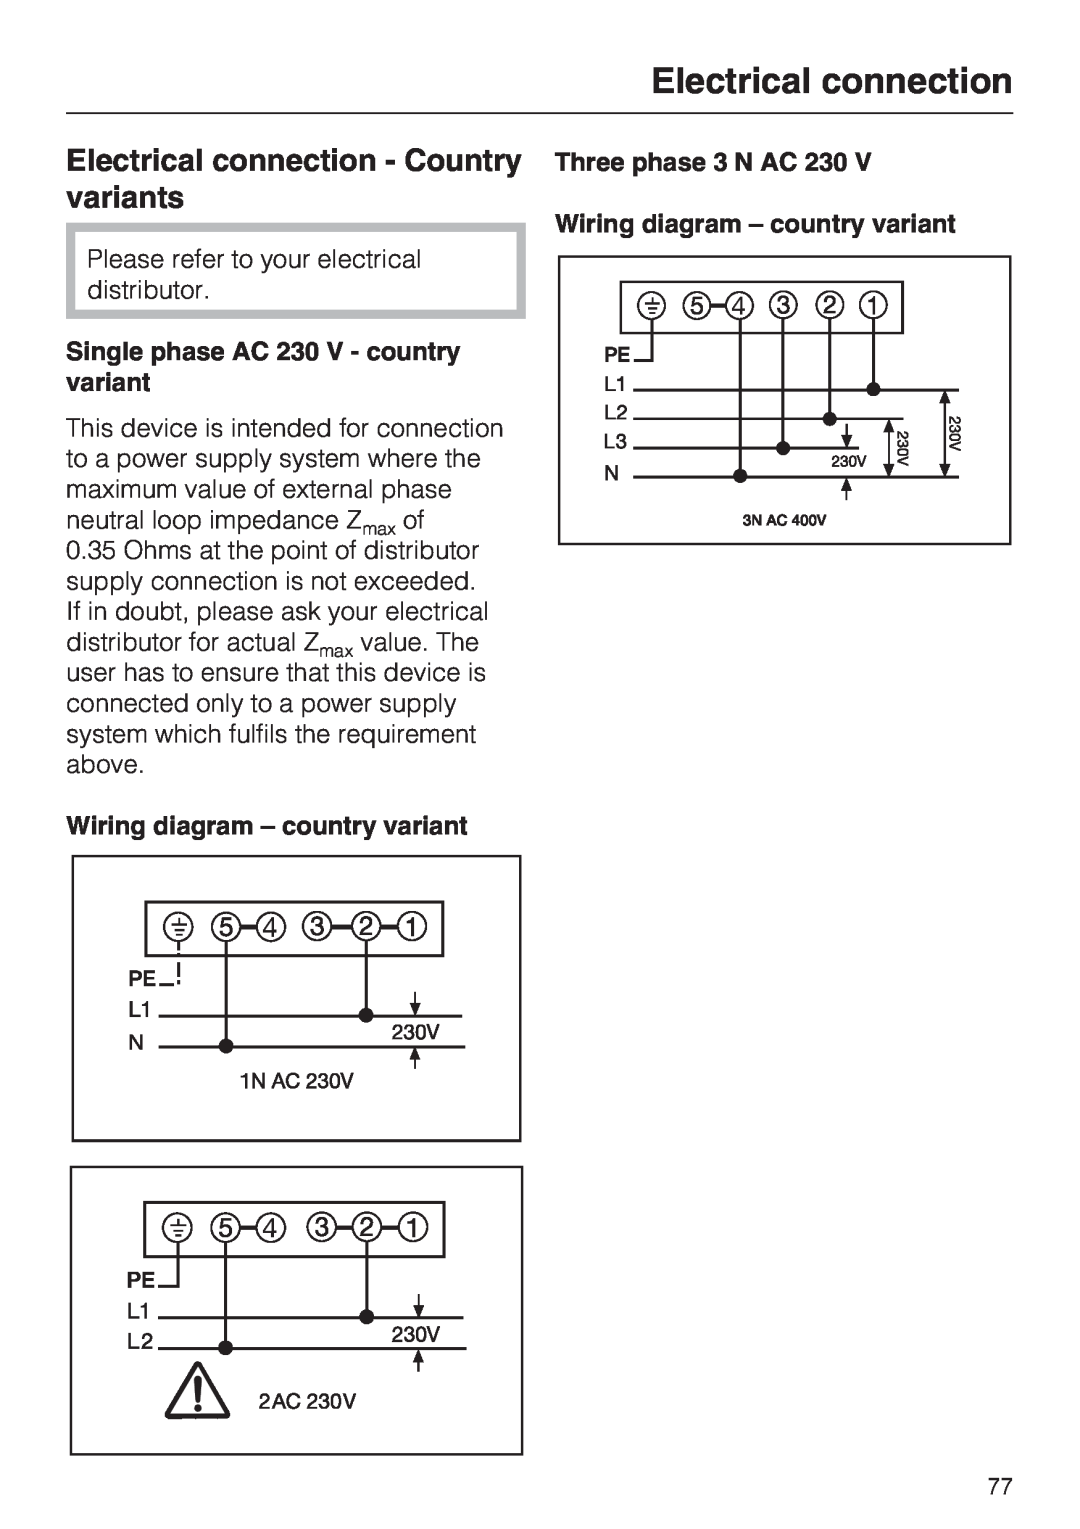 Miele H 5961 B Electrical connection - Country variants, Single phase AC 230 V - country variant, Three phase 3 N AC 